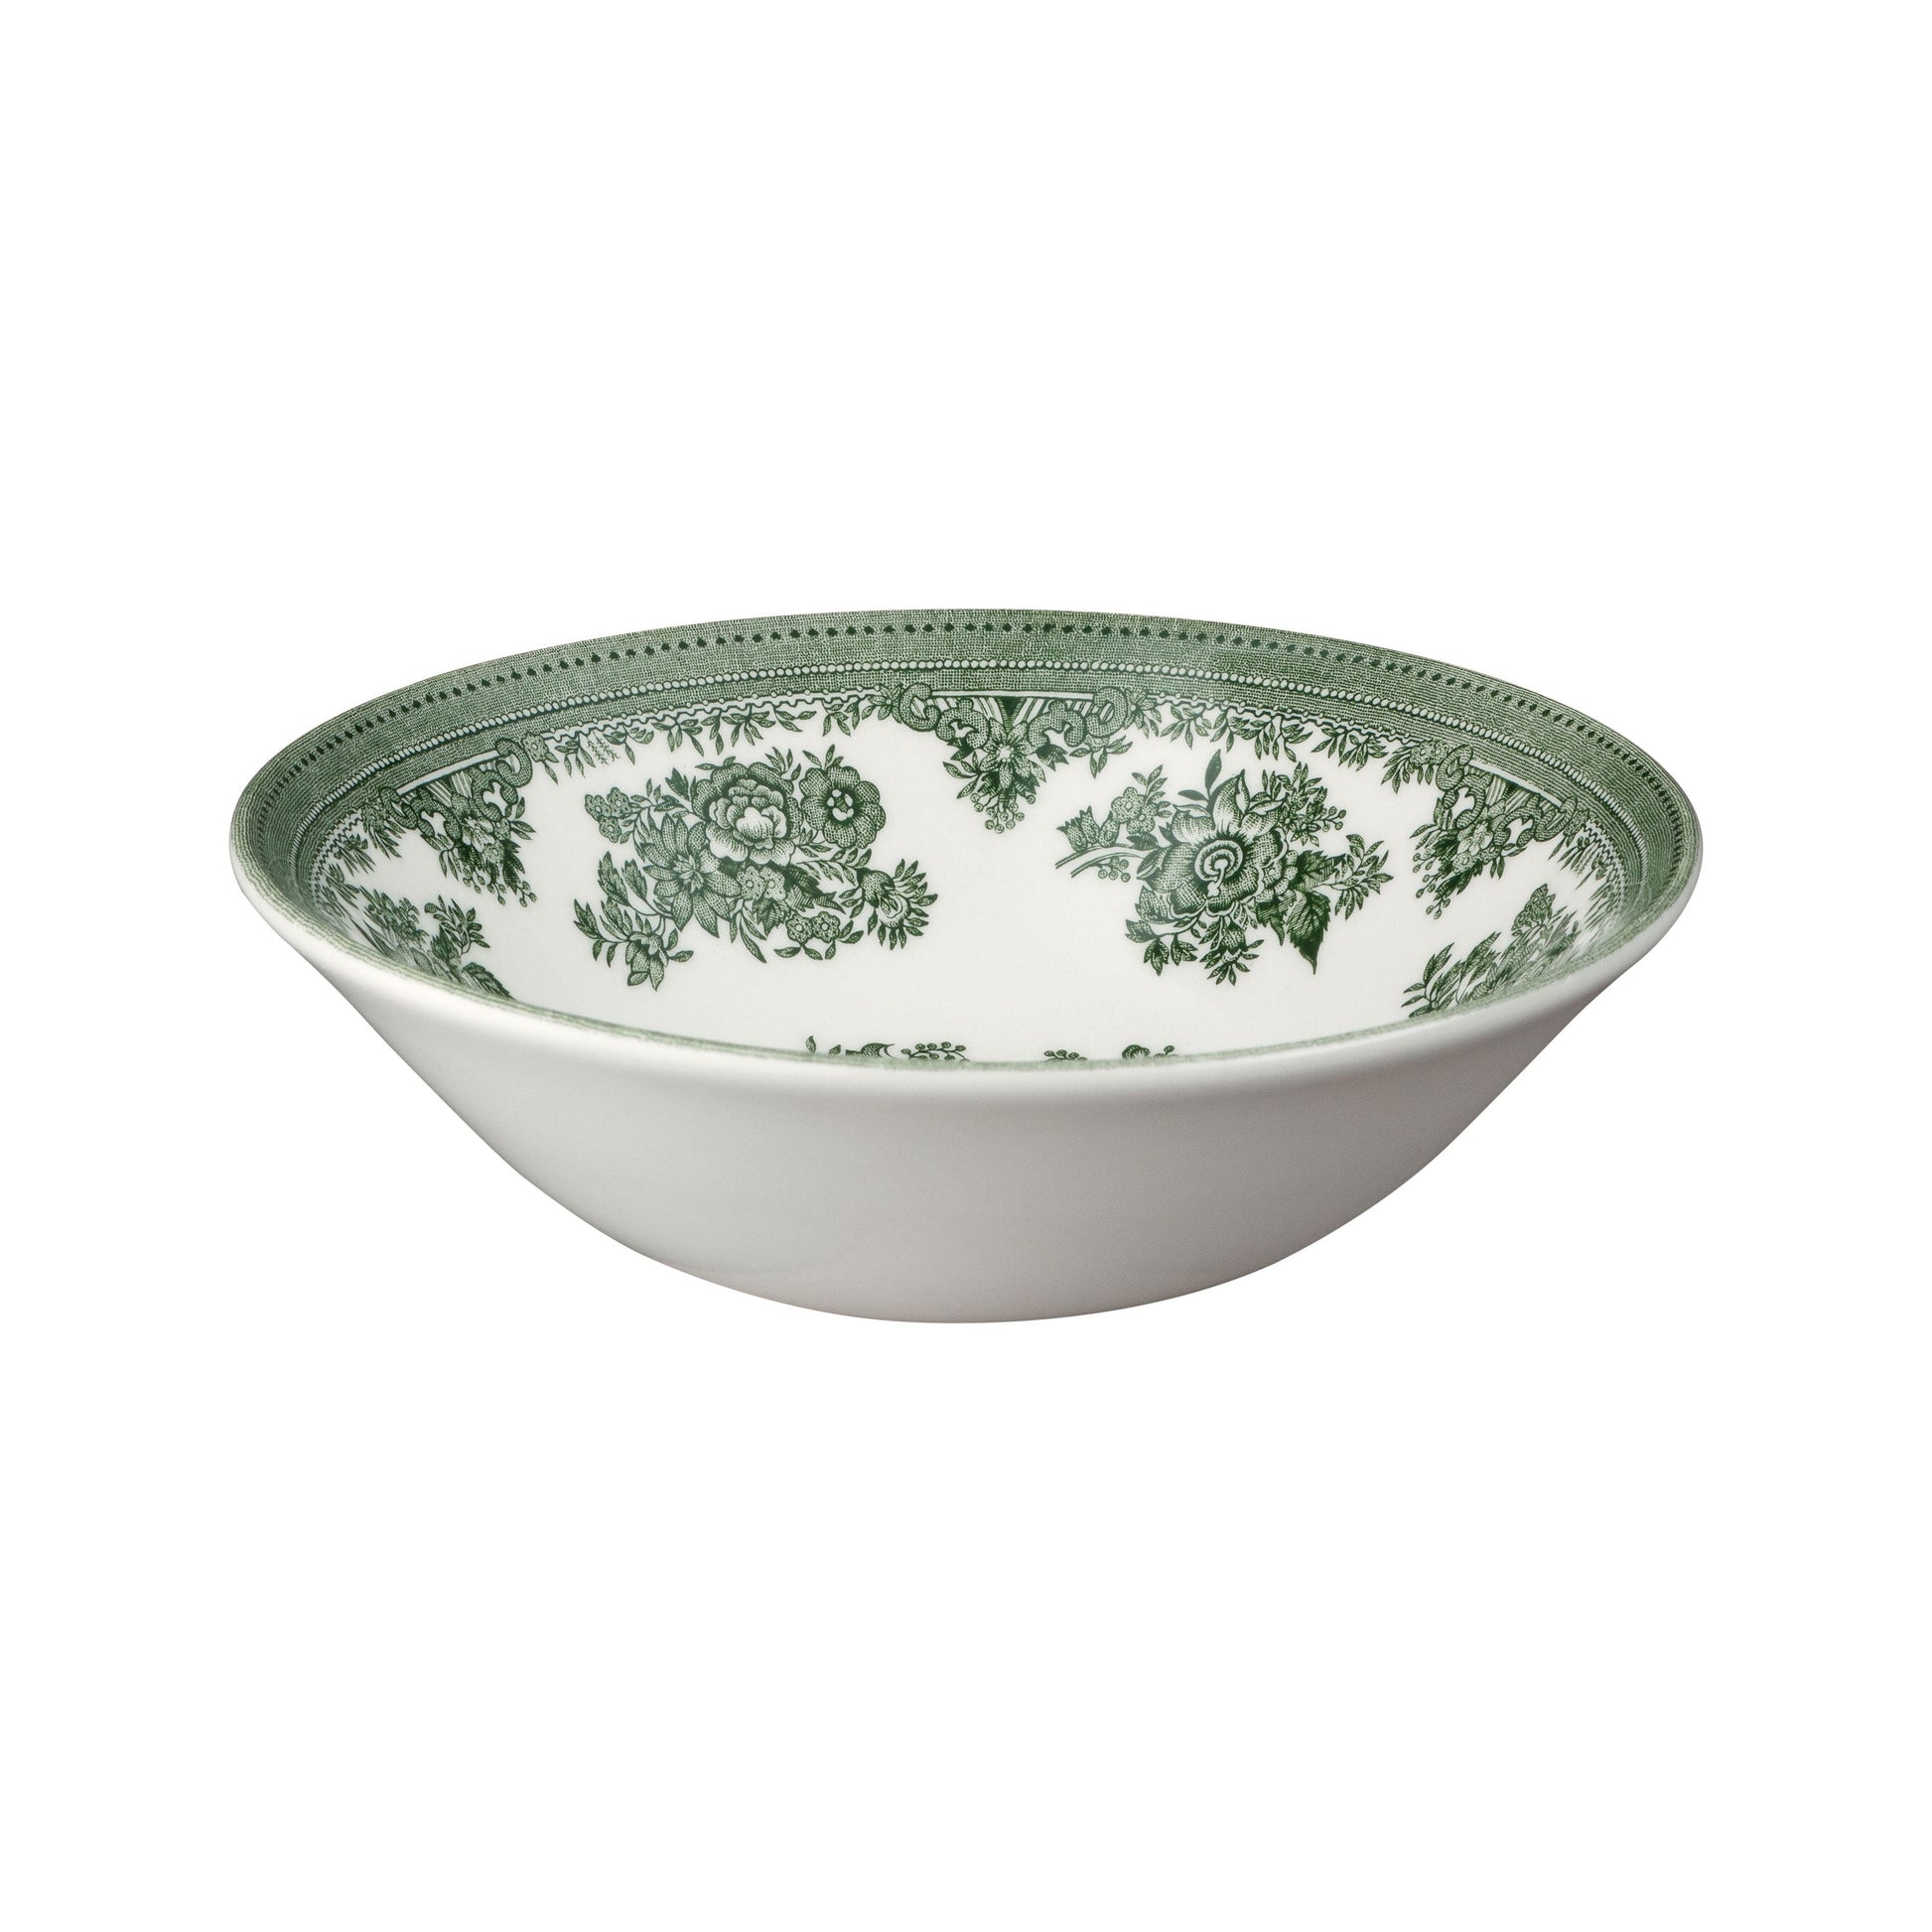 Green Asiatic Pheasants Cereal Bowl 16cm/6.25" Seconds